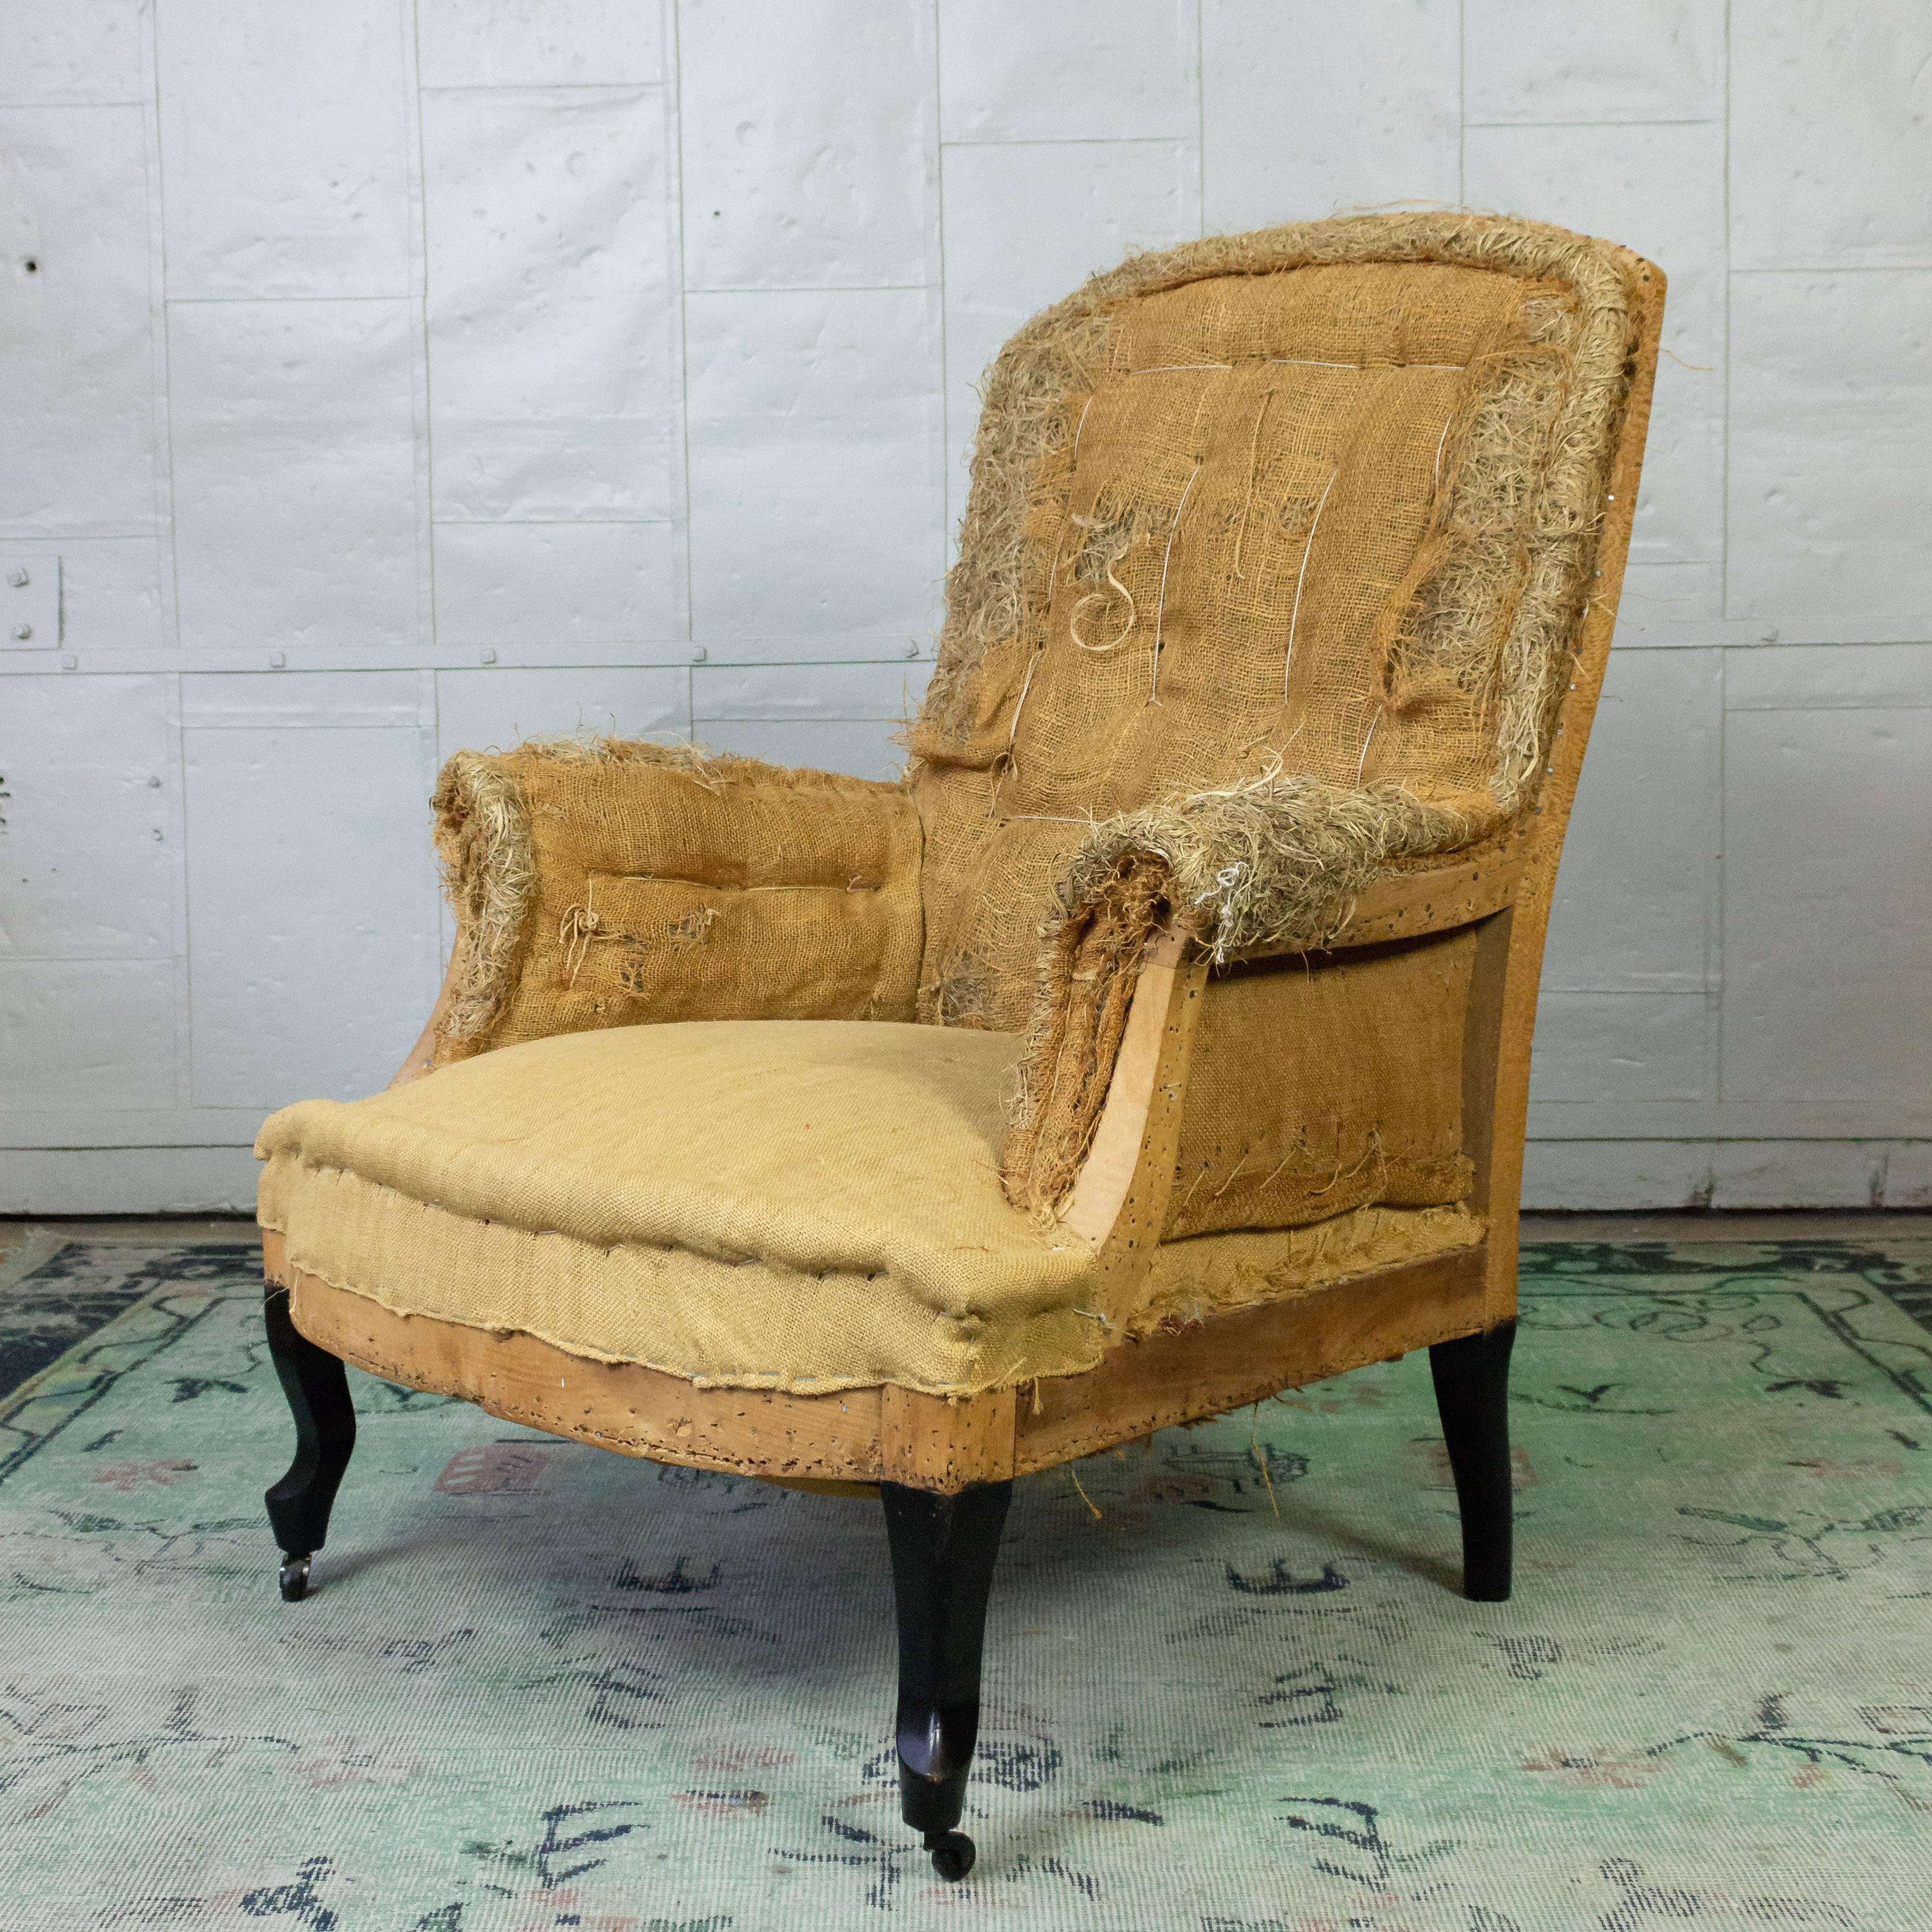 French 19th century armchair with ebonized cabriole legs, stripped down to the original muslin and burlap. Ready to be upholstered.

Ref #: SN0512-09

Dimensions: 39